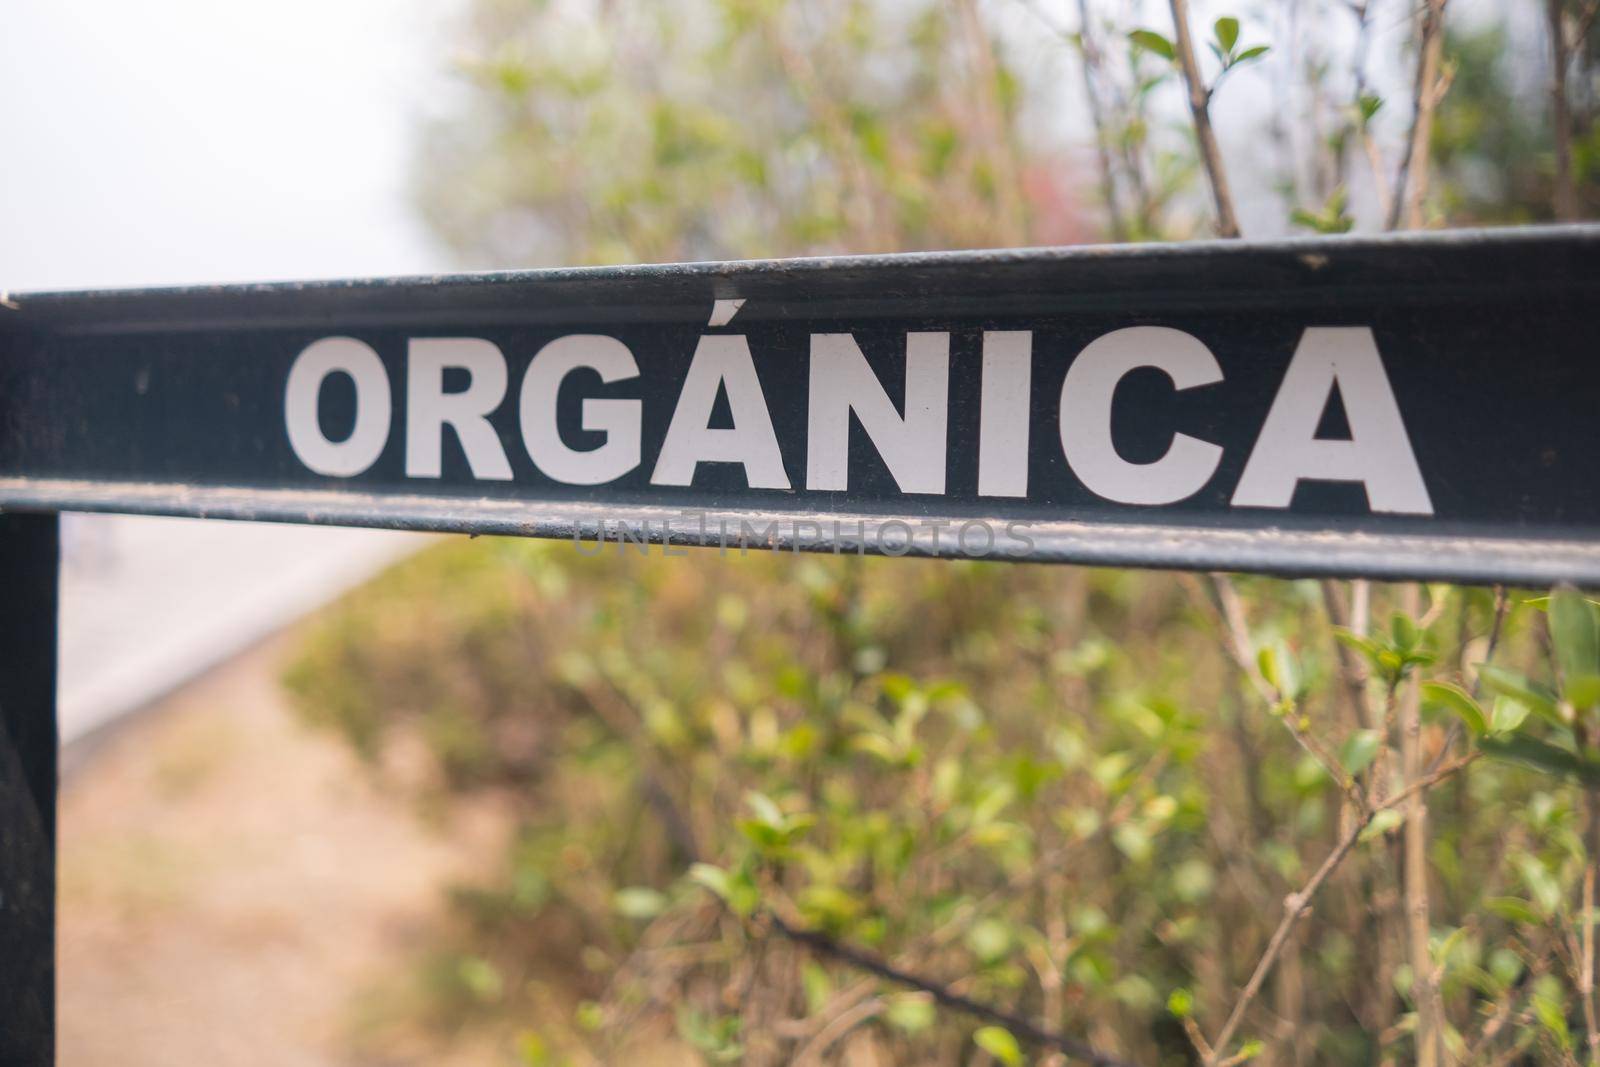 Close-up of Spanish sign for organic trash in park from Mexico City. White capital letters in black metal bar with blurry plants as background. Environment and outdoors